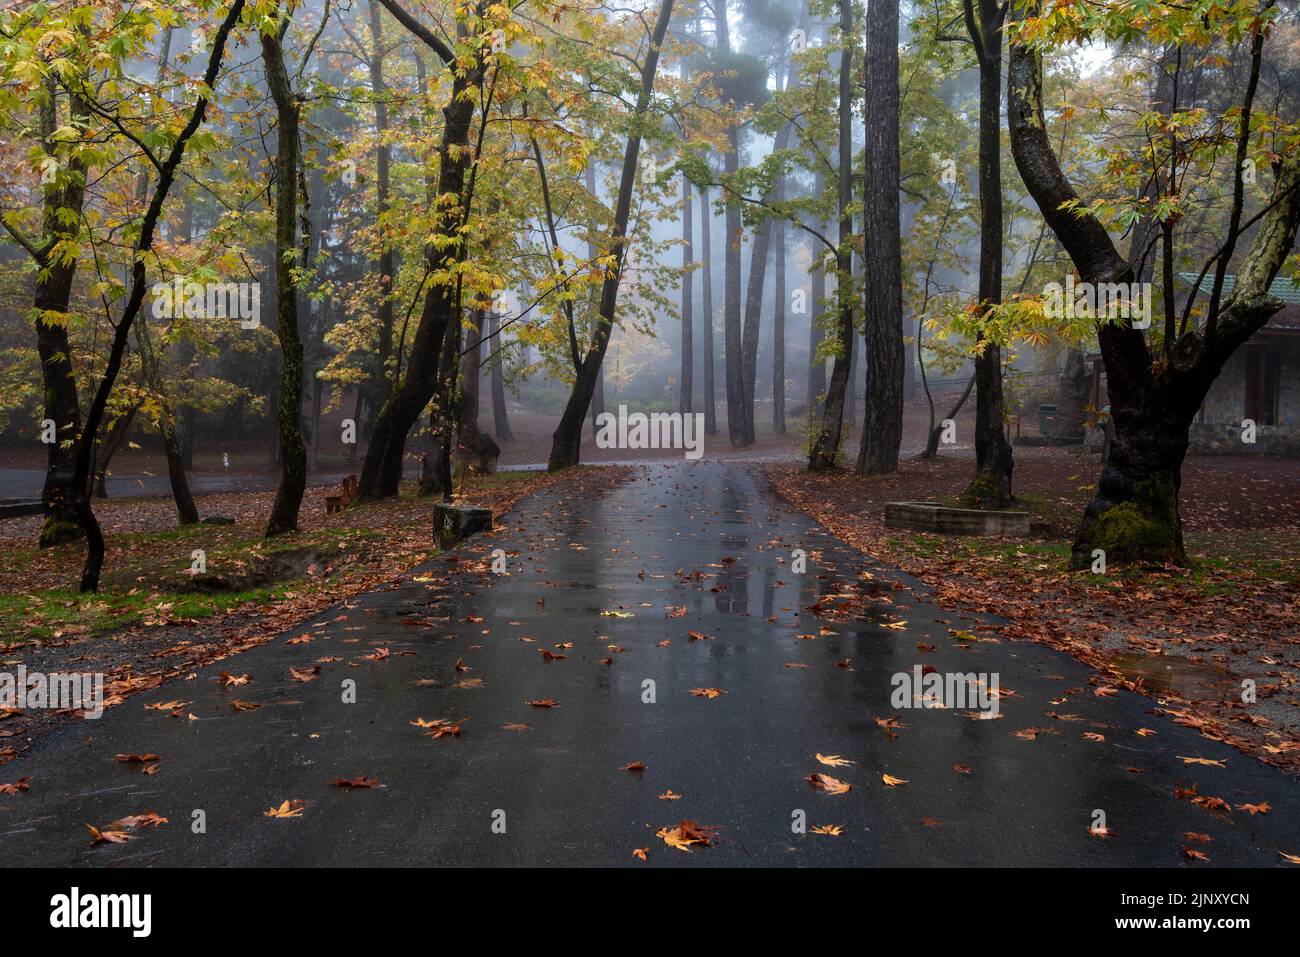 Autumn landscape maple trees and autumn leaves on the ground after rain. Stock Photo